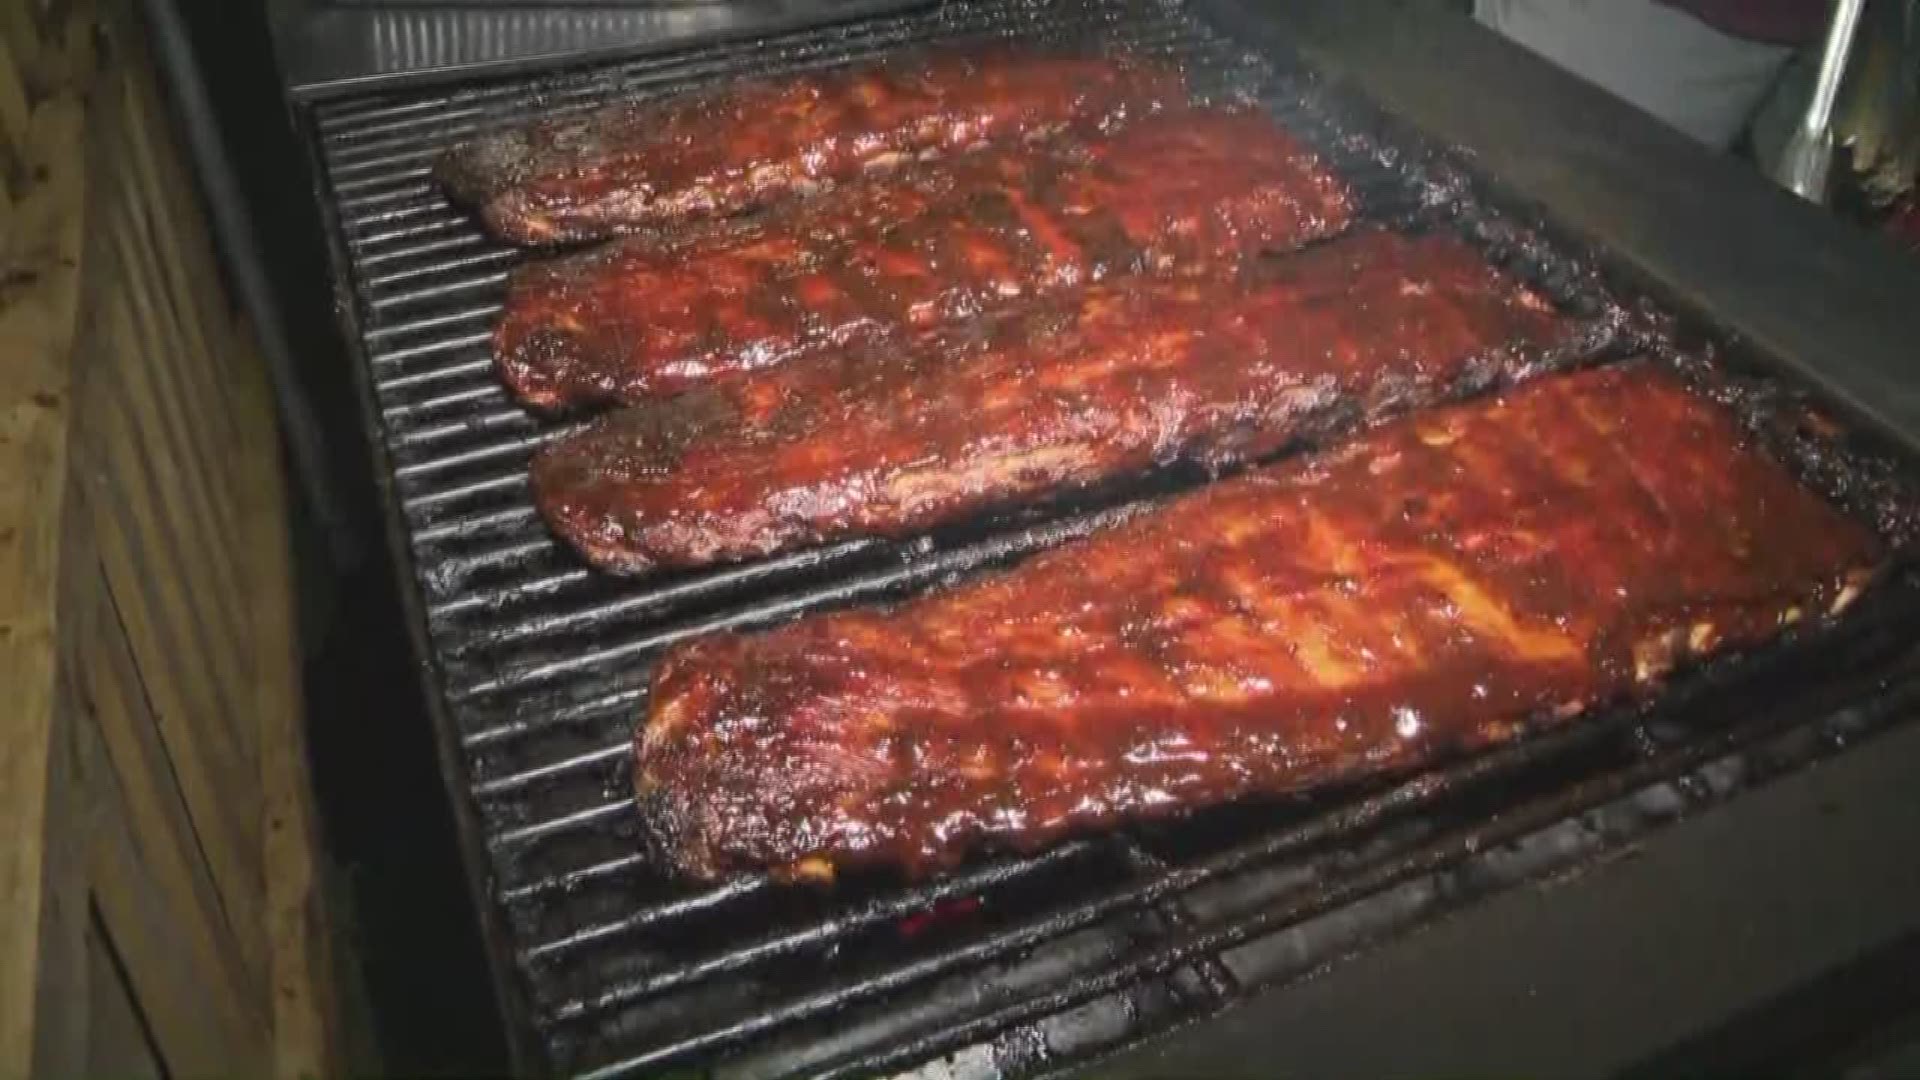 June 22, 2018: Yum! Barbecue season is in full swing, and Strongsville is getting the summer season started with the 32nd annual Rib Burnoff.